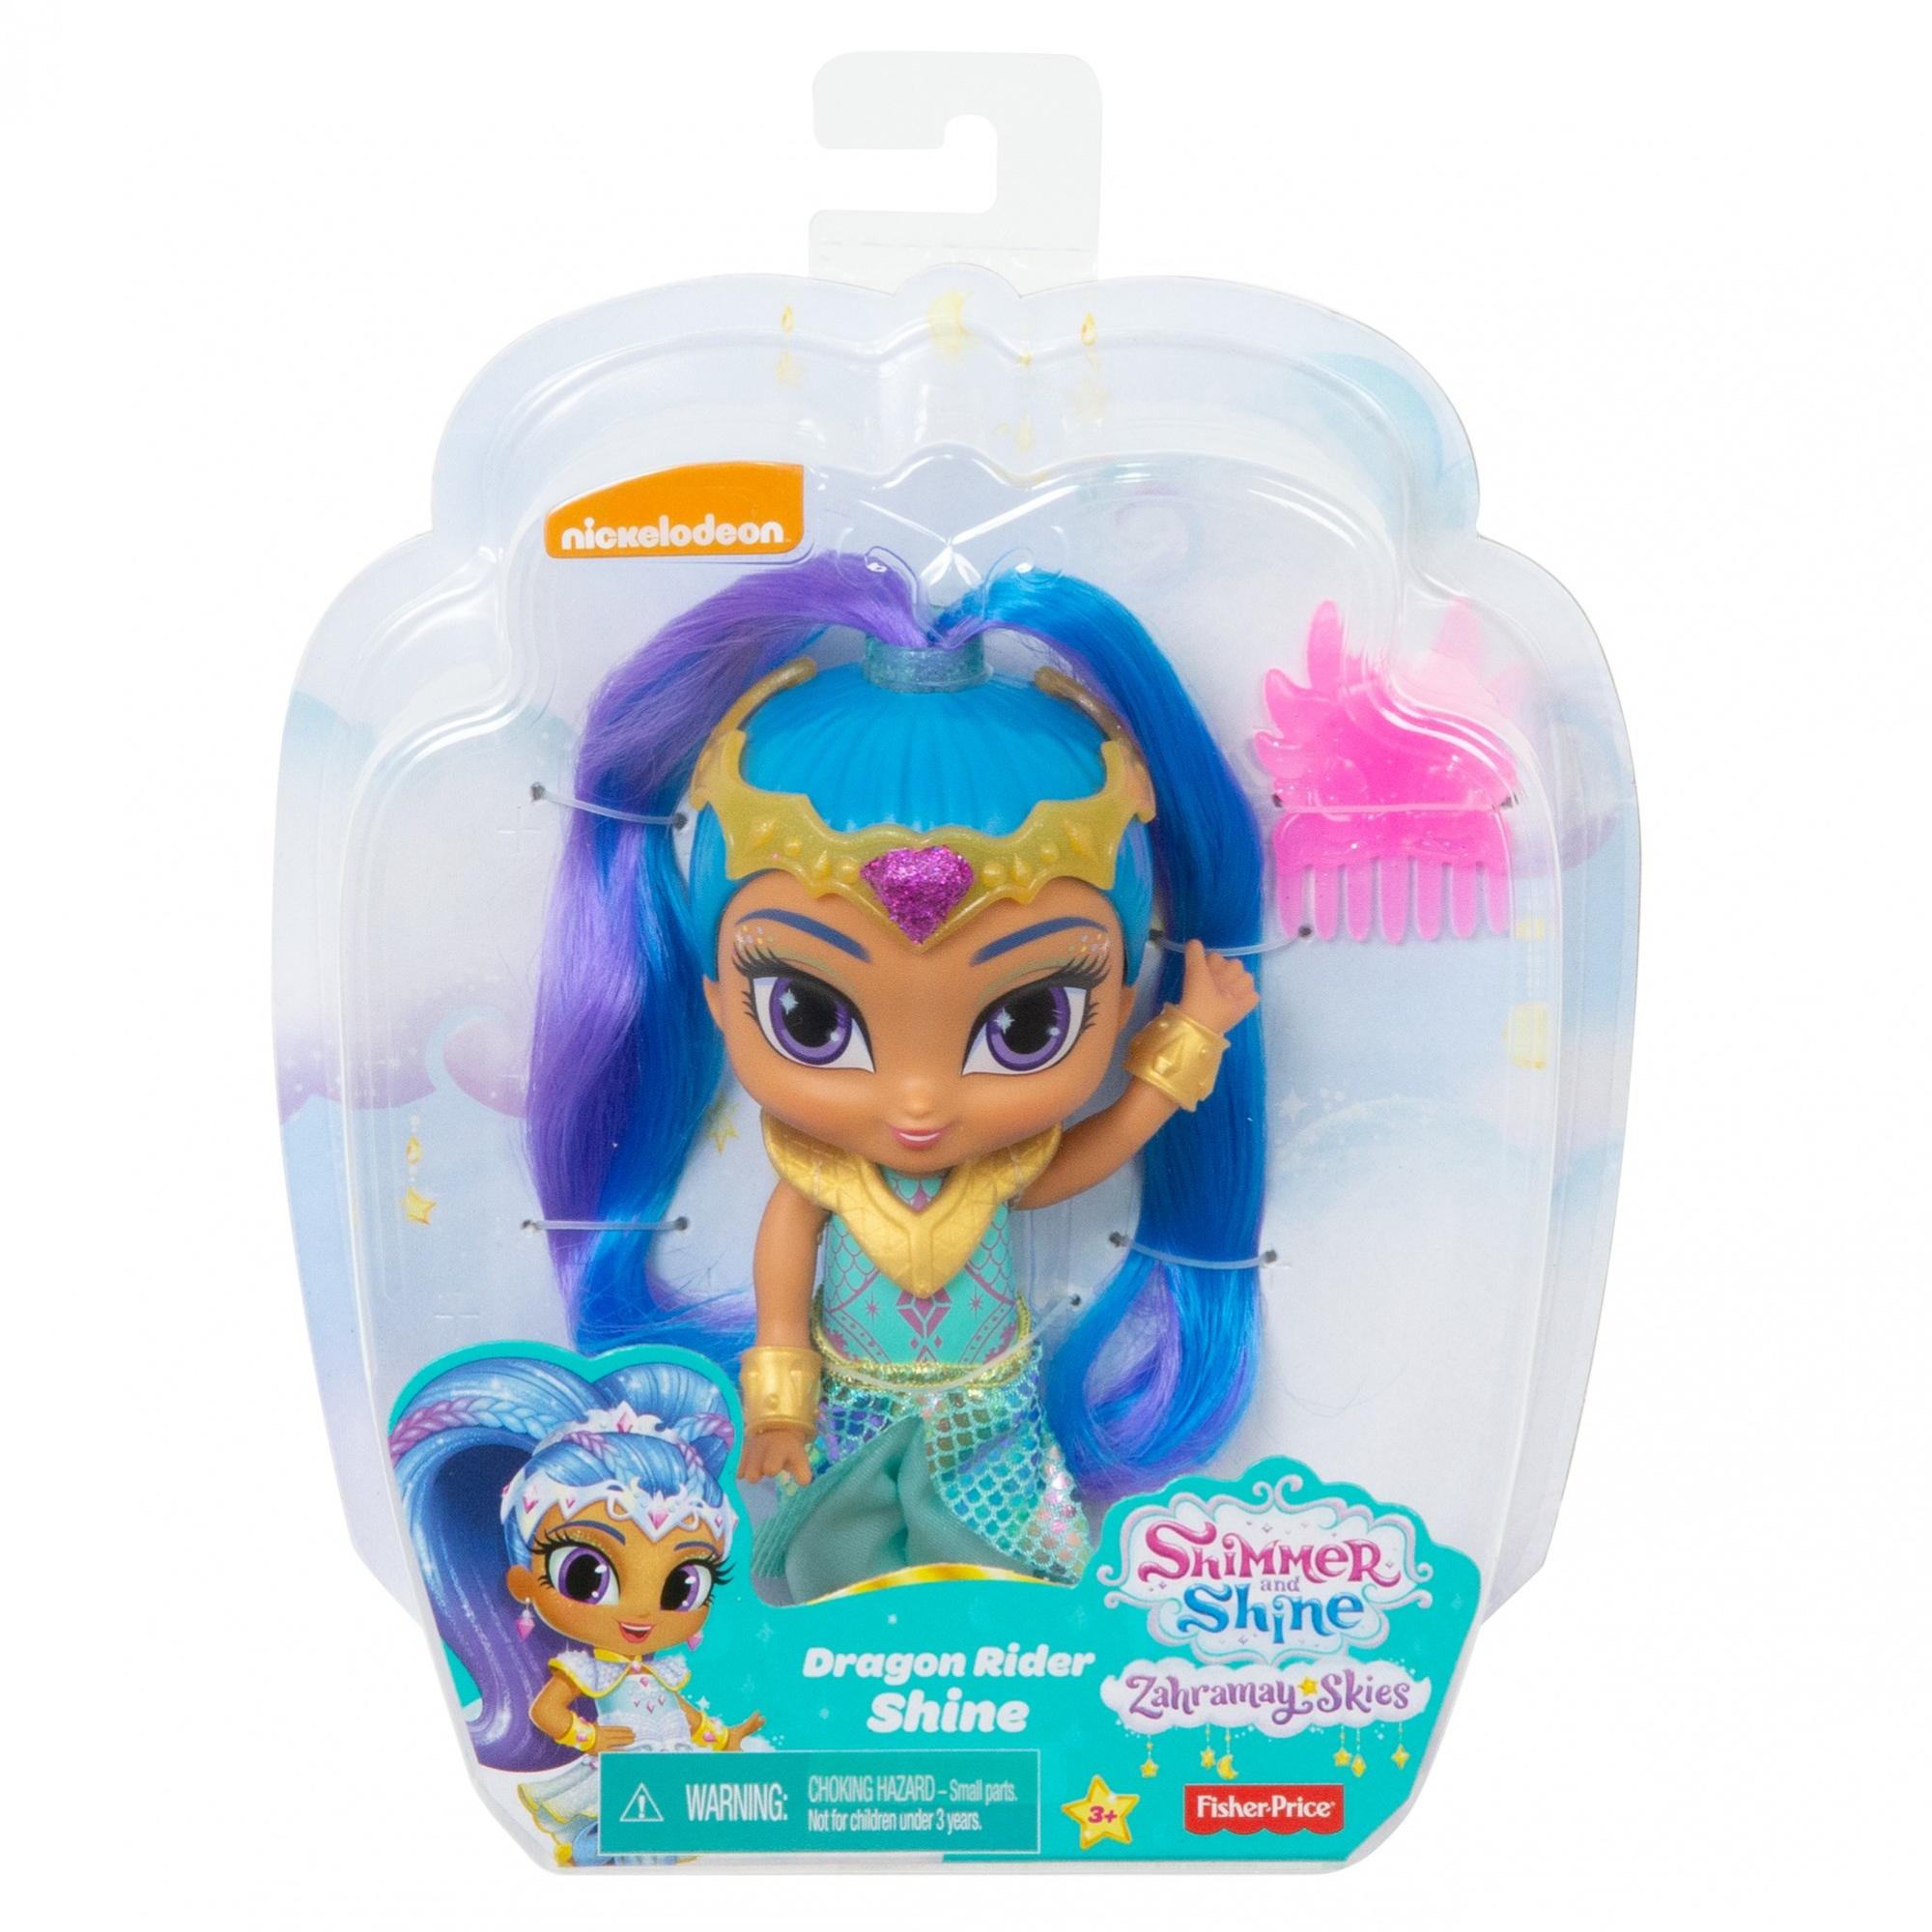 Nickelodeon Shimmer & Shine Dragon Rider Shine Doll with Accessories - image 4 of 4